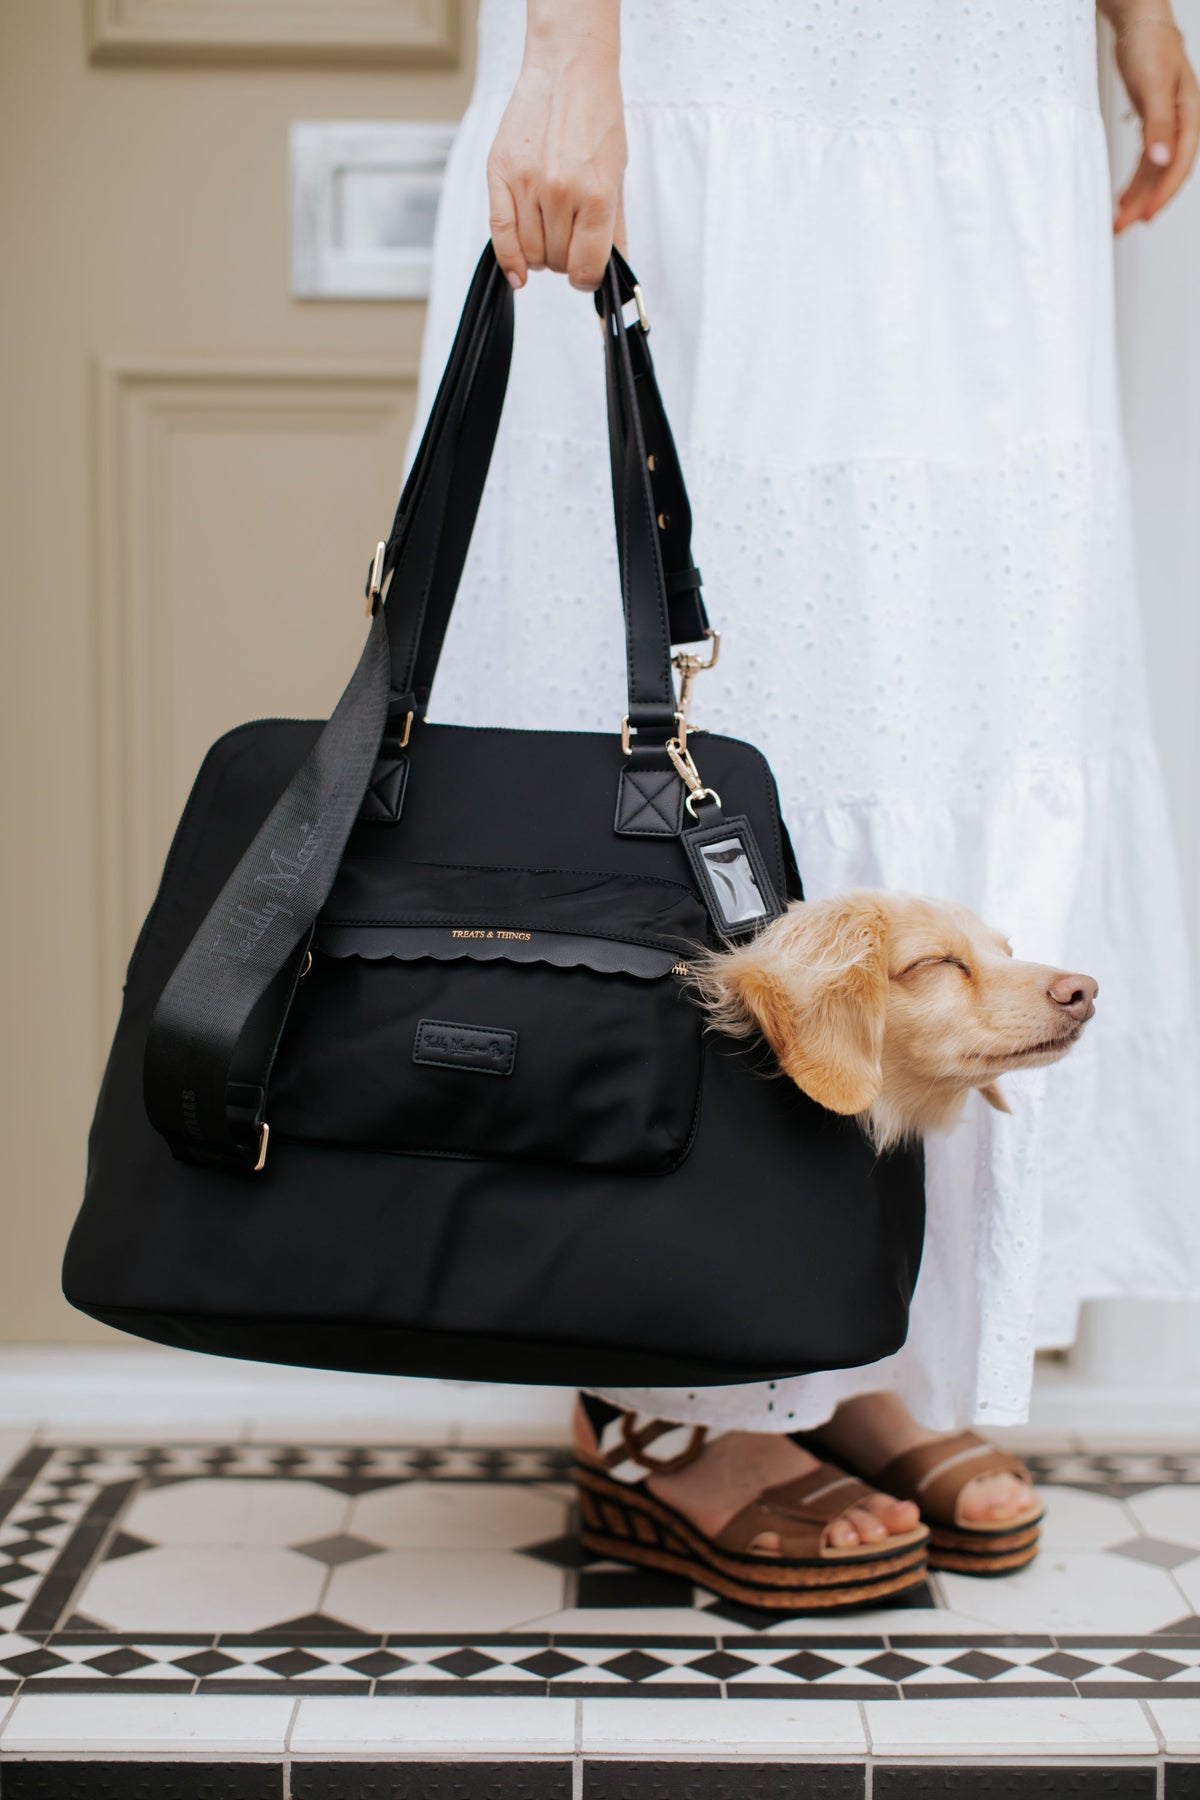 NEW! 'Totes Love You' Dog Carrier